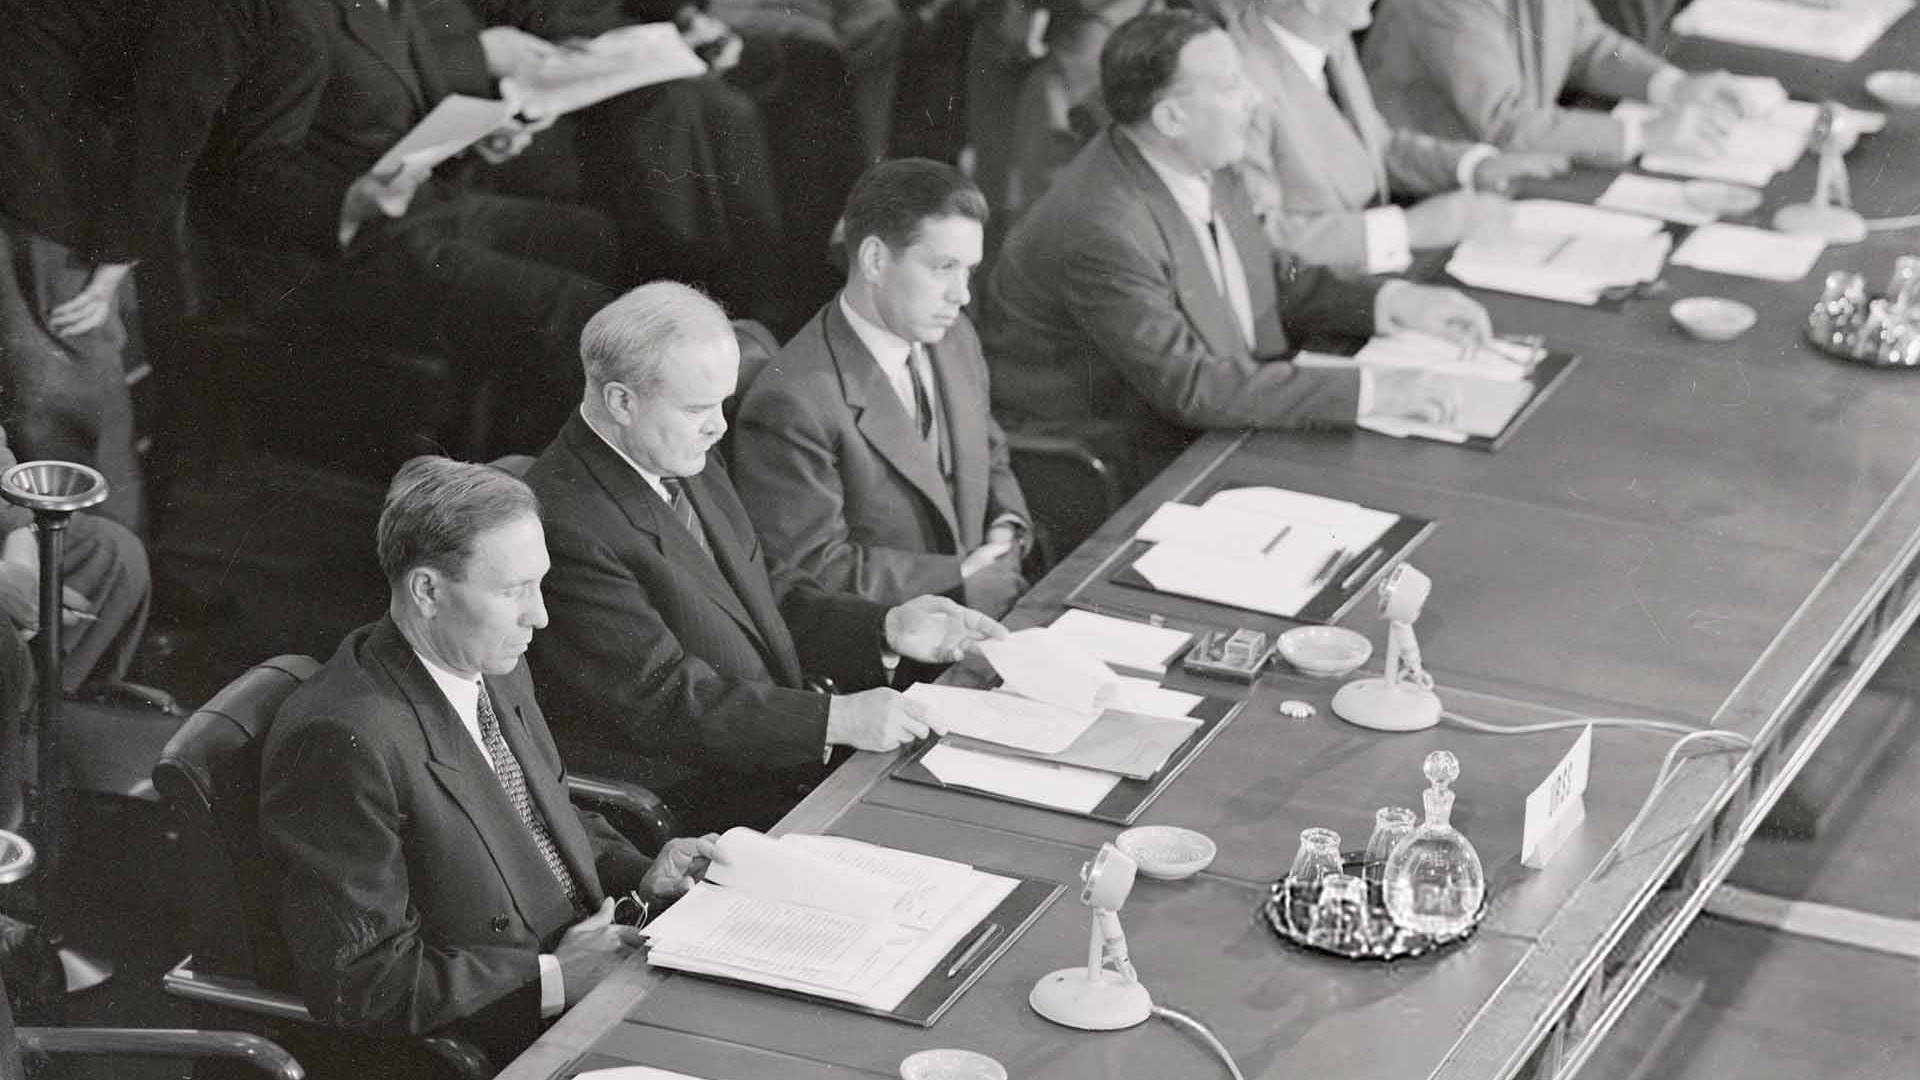 The Soviet Union’s role in negotiating and signing the Geneva Agreements